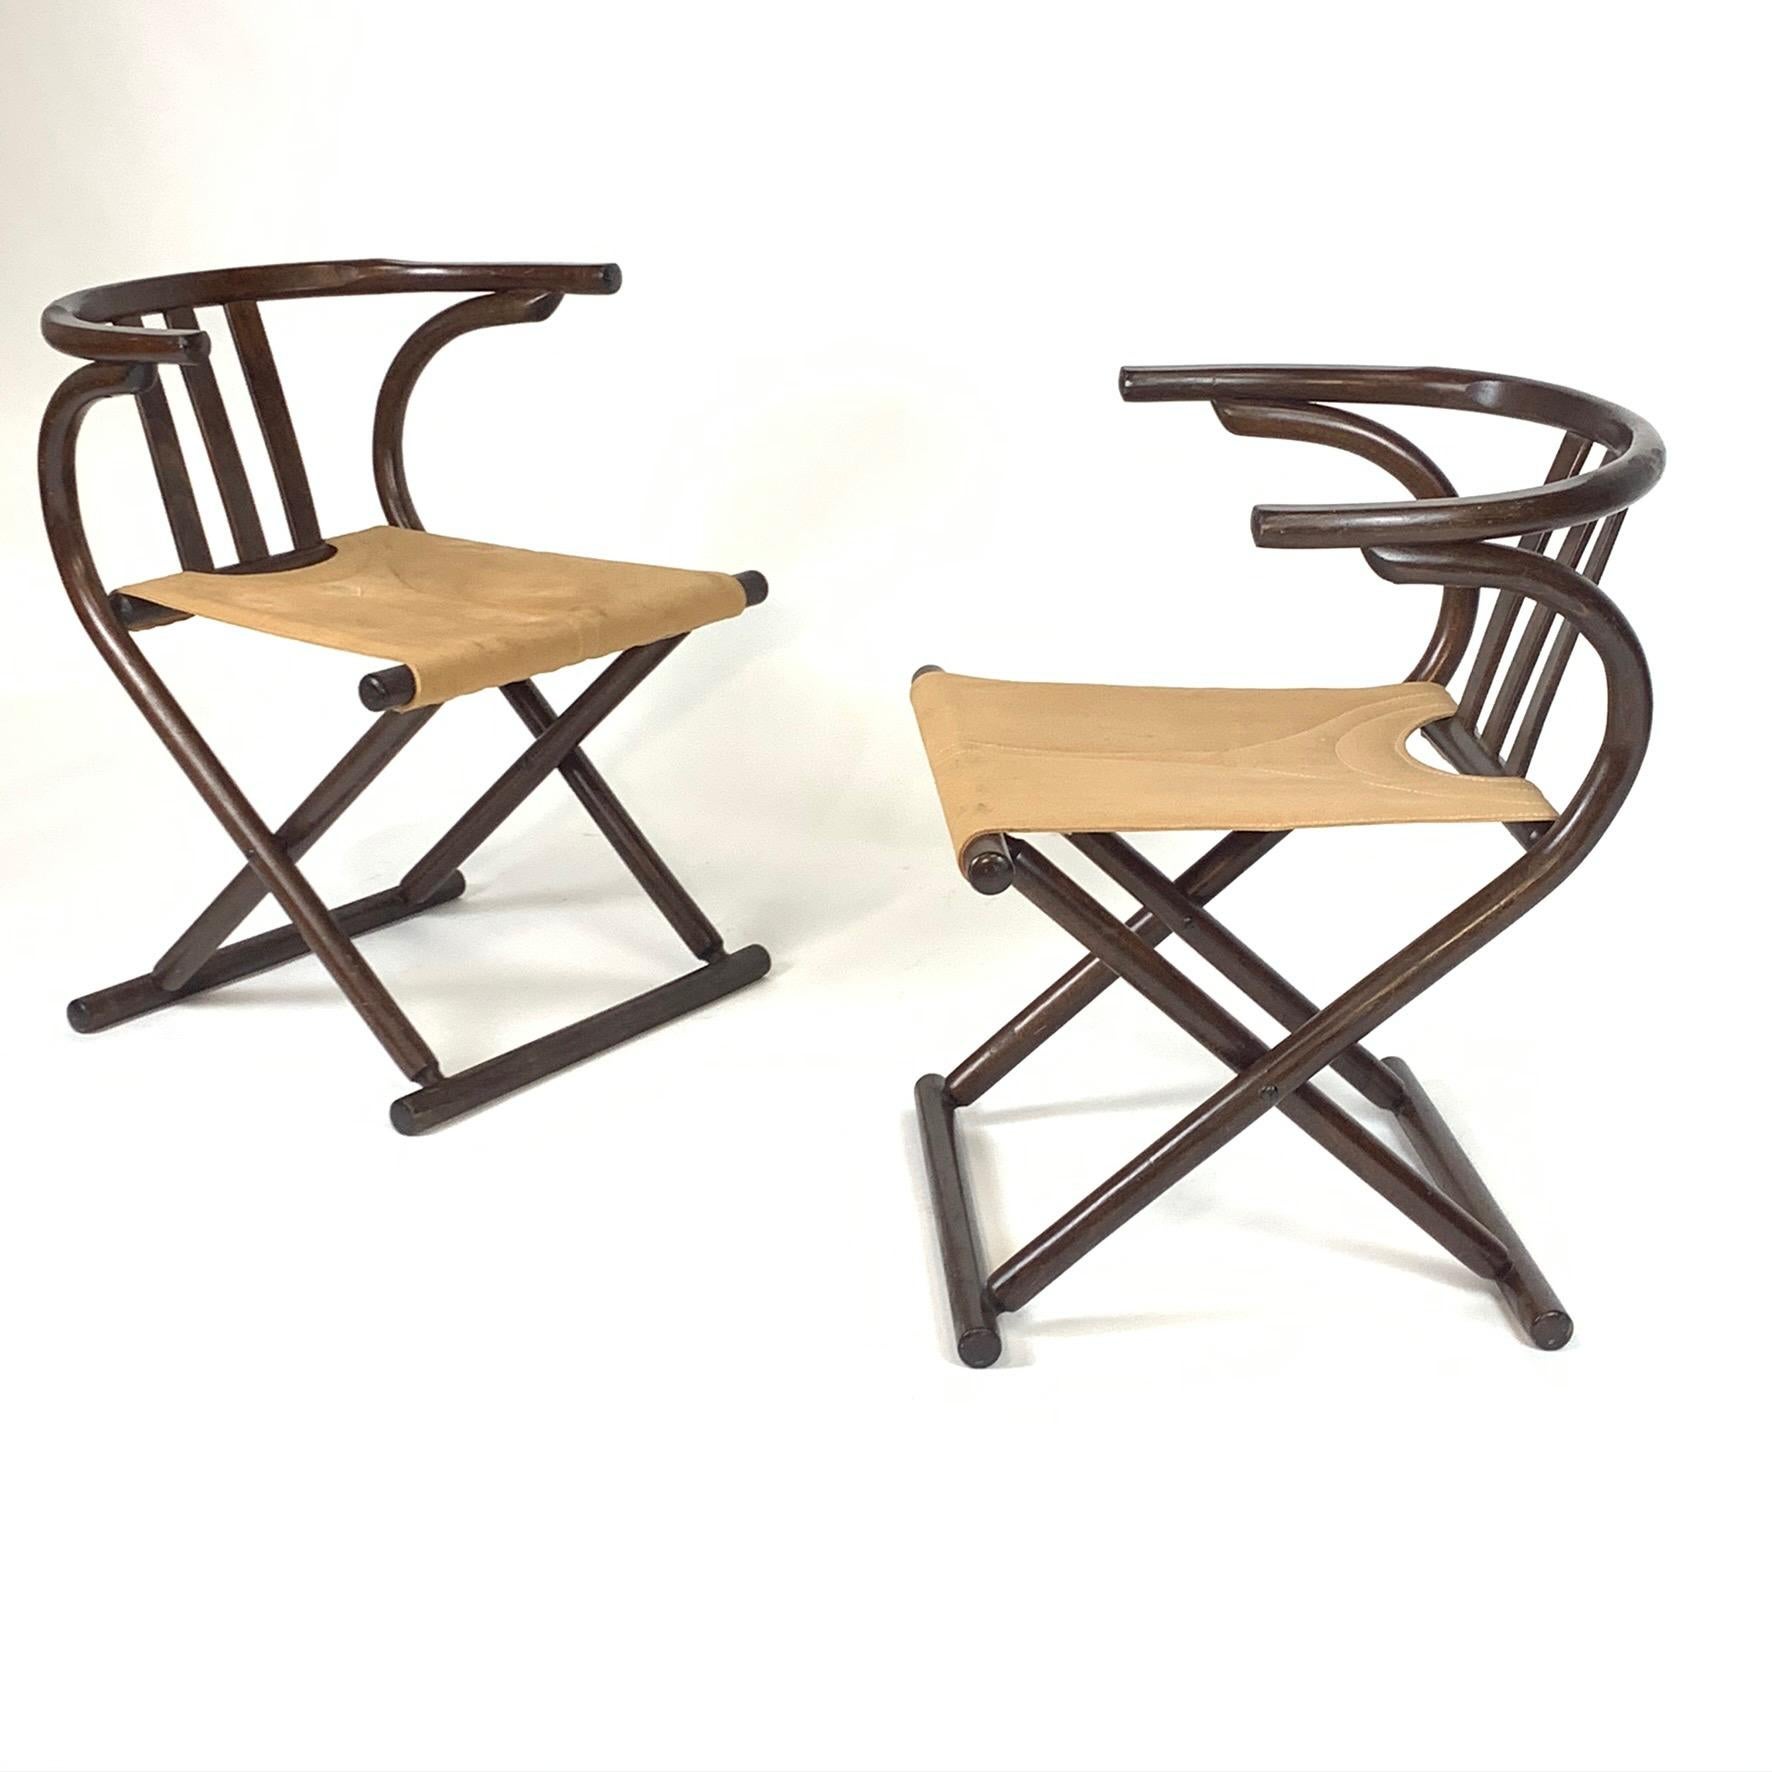 German Unique Pair Folding Campaign Bentwood and Canvas Chairs by August Thonet, 1960s